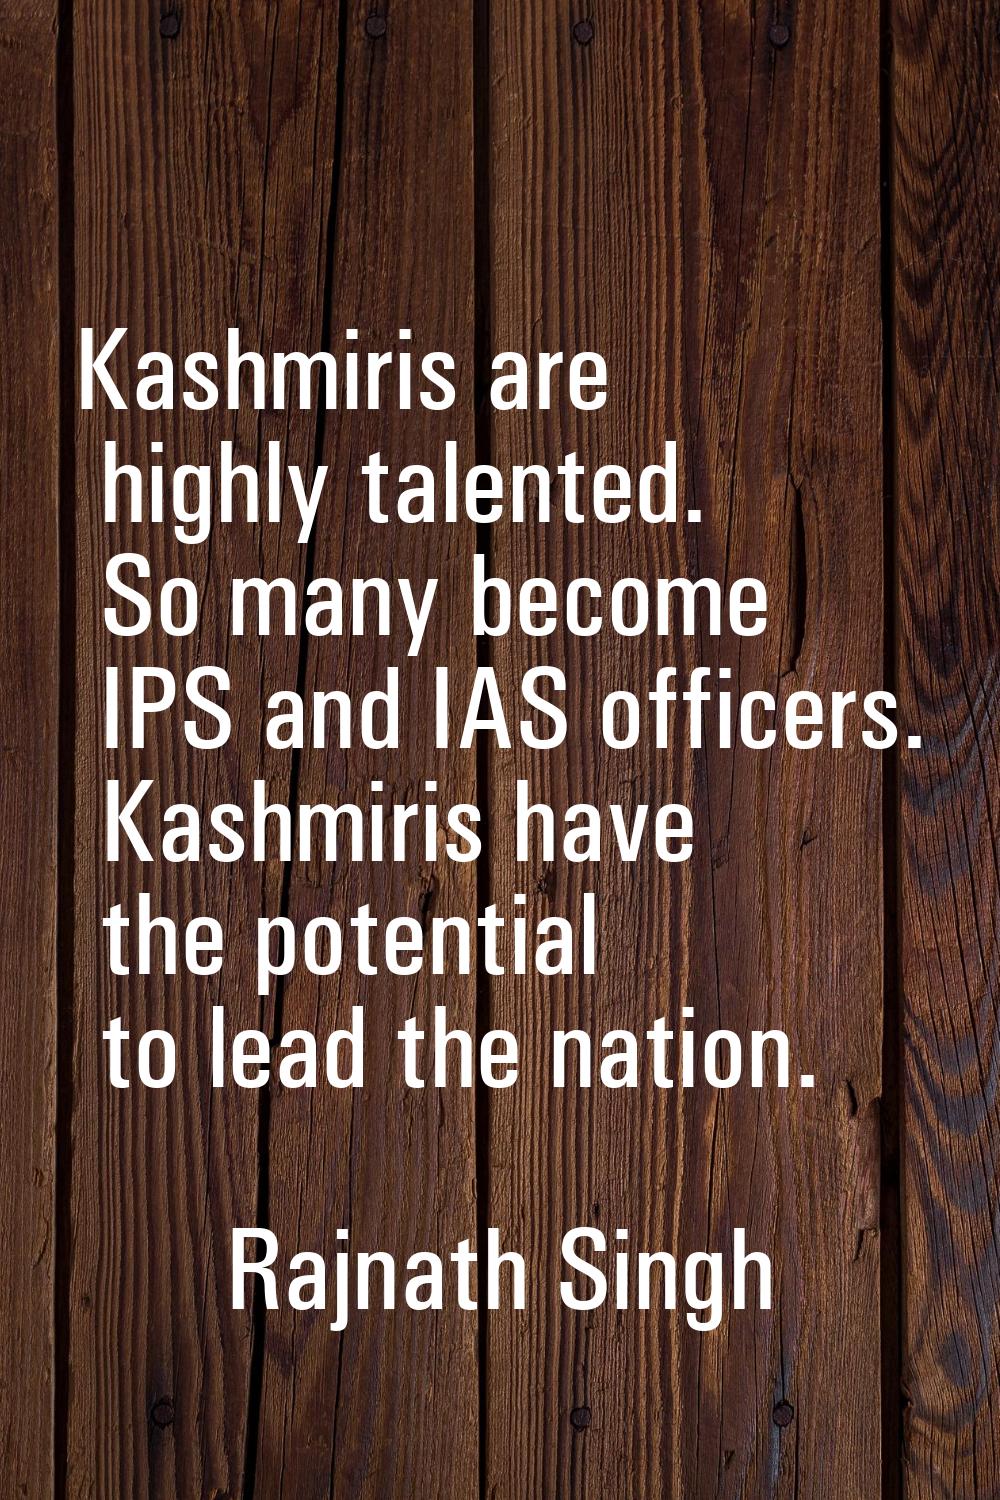 Kashmiris are highly talented. So many become IPS and IAS officers. Kashmiris have the potential to